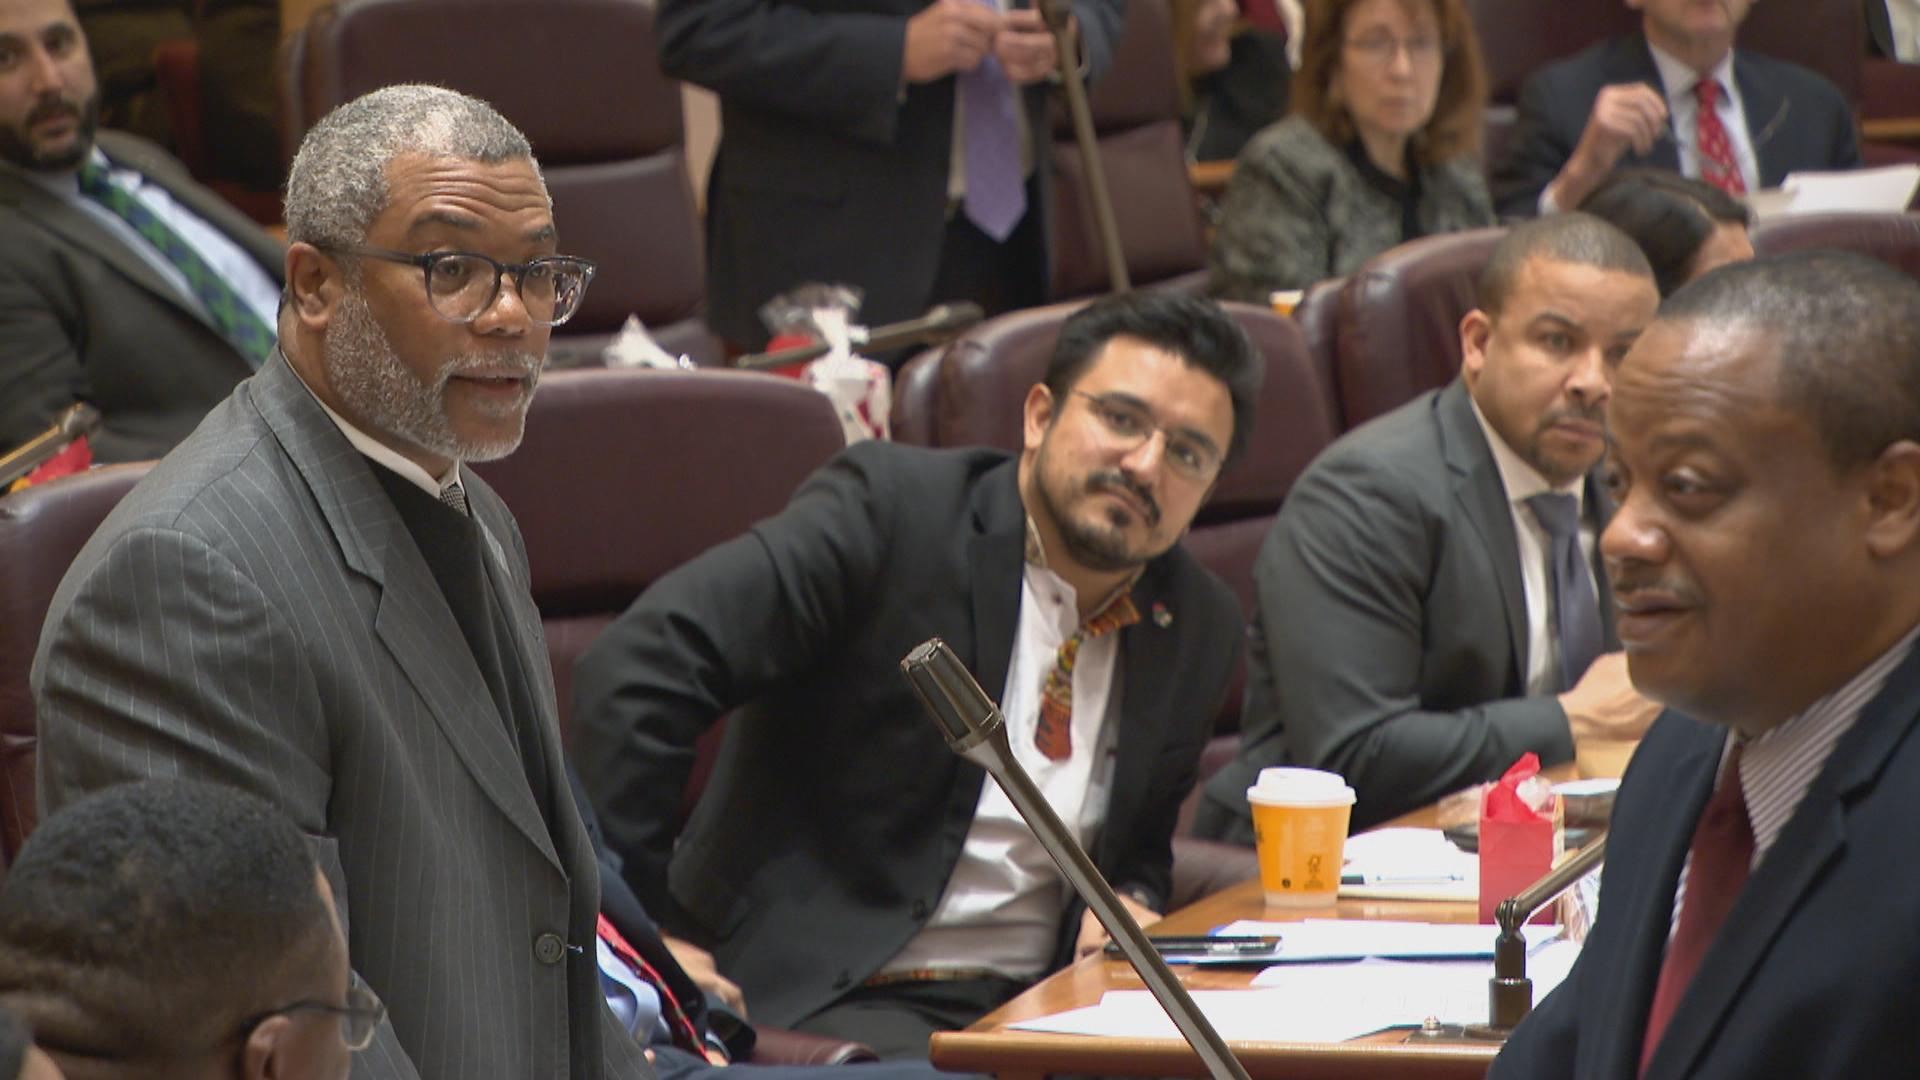 Ald. Walter Burnett, left, clarifies his use of the word “bump” during a tension-filled City Council meeting on Wednesday, Dec. 18, 2019. (WTTW News)